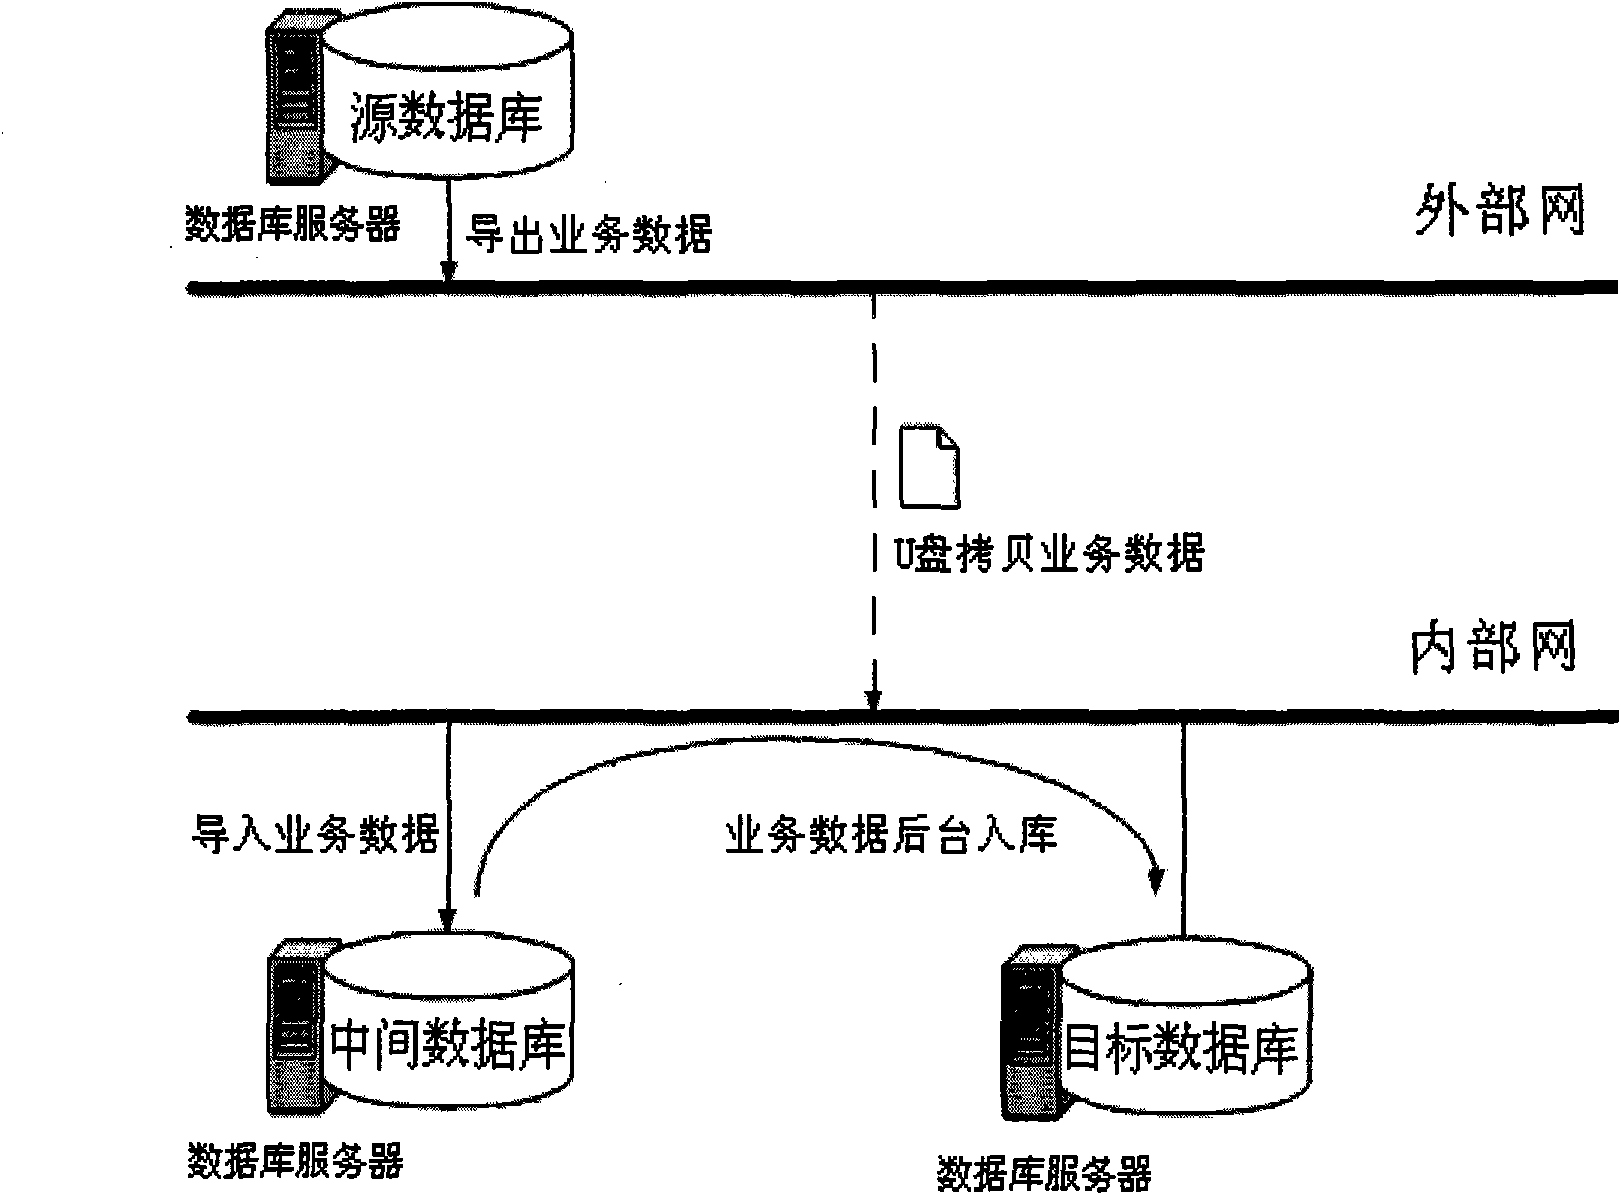 Method for synchronizing data between different databases under physical isolating condition